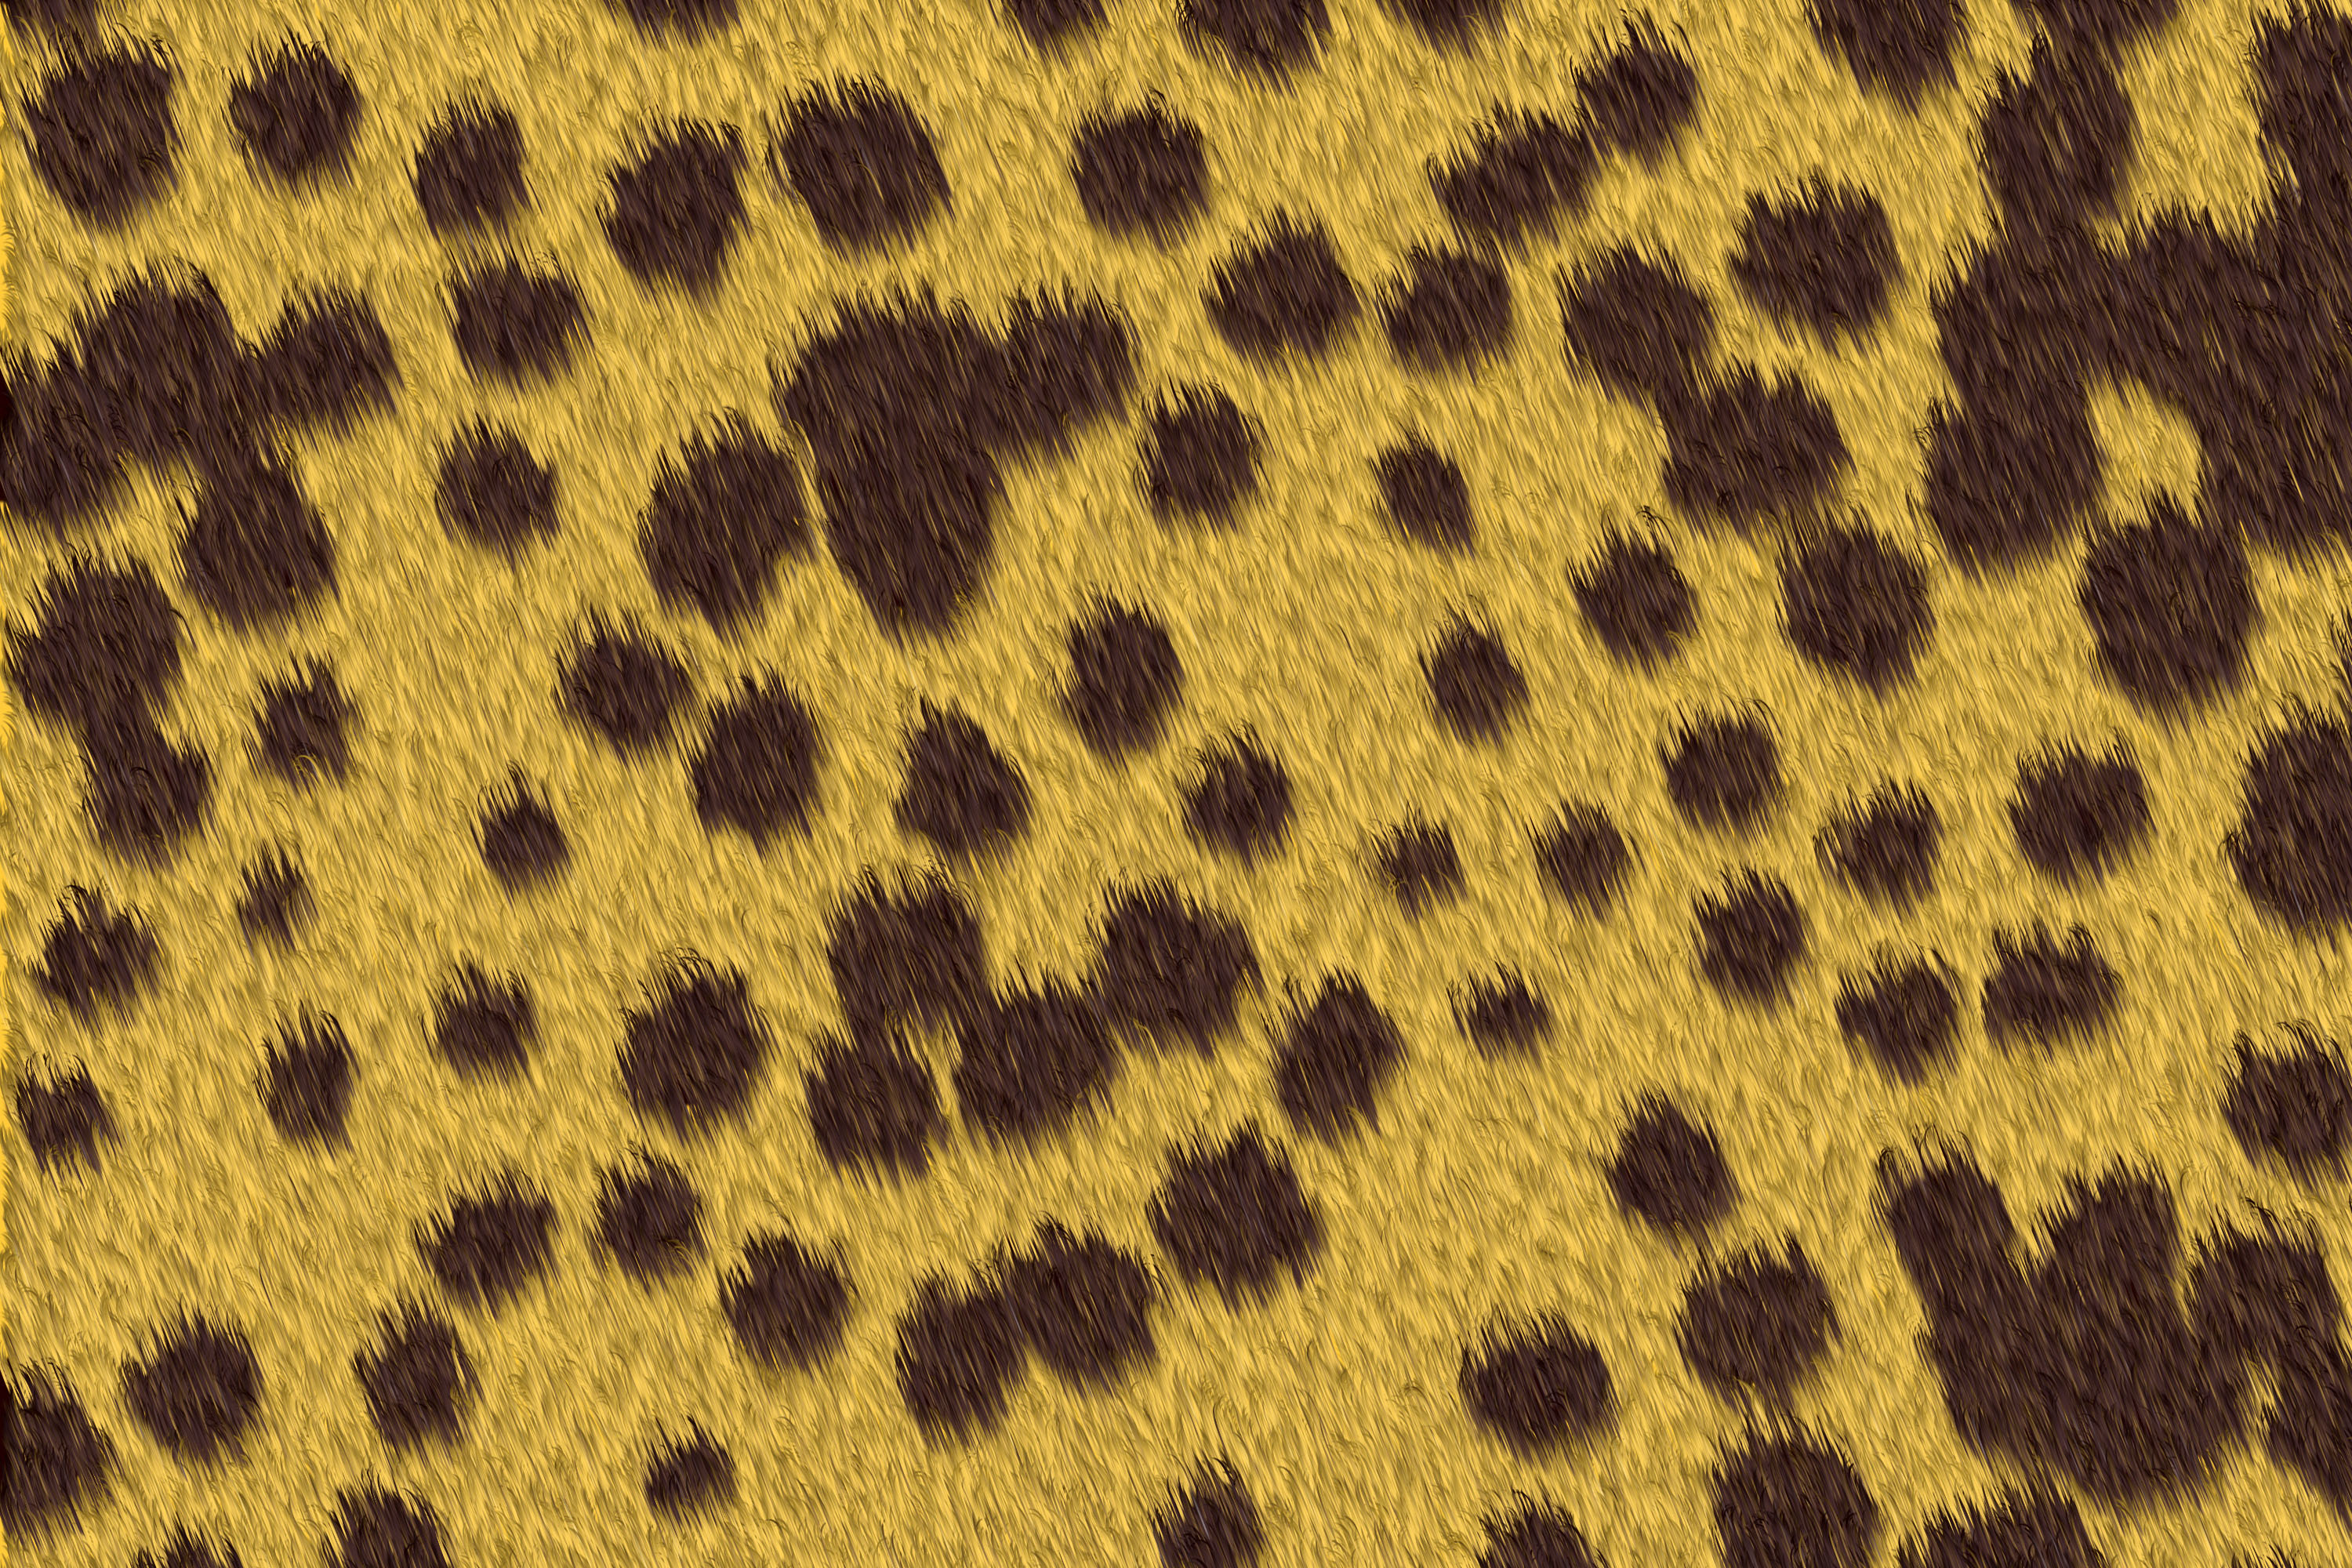 Abstract Brown Pattern Skin Spot Texture 3000x2000